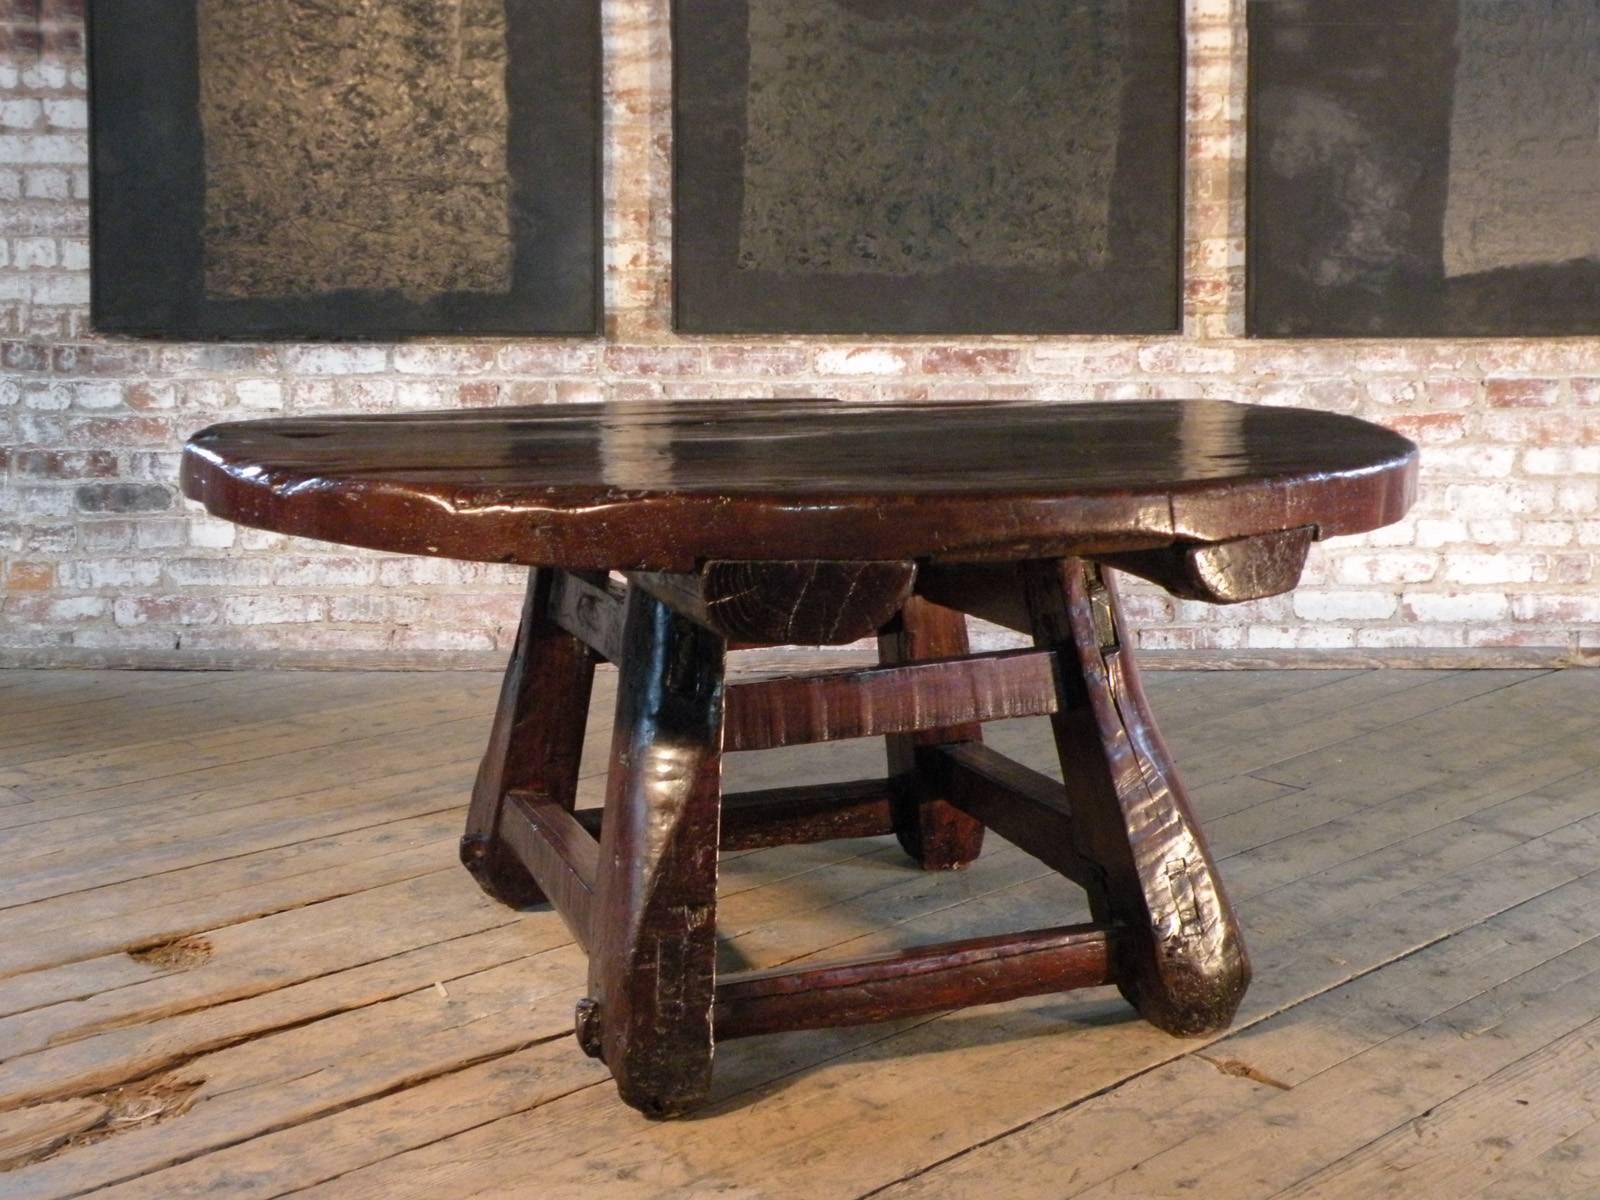 Unusual, striking, bold.
Large low round table with a massive top supported by a flared square base constructed from roughly hewn wooden beams.